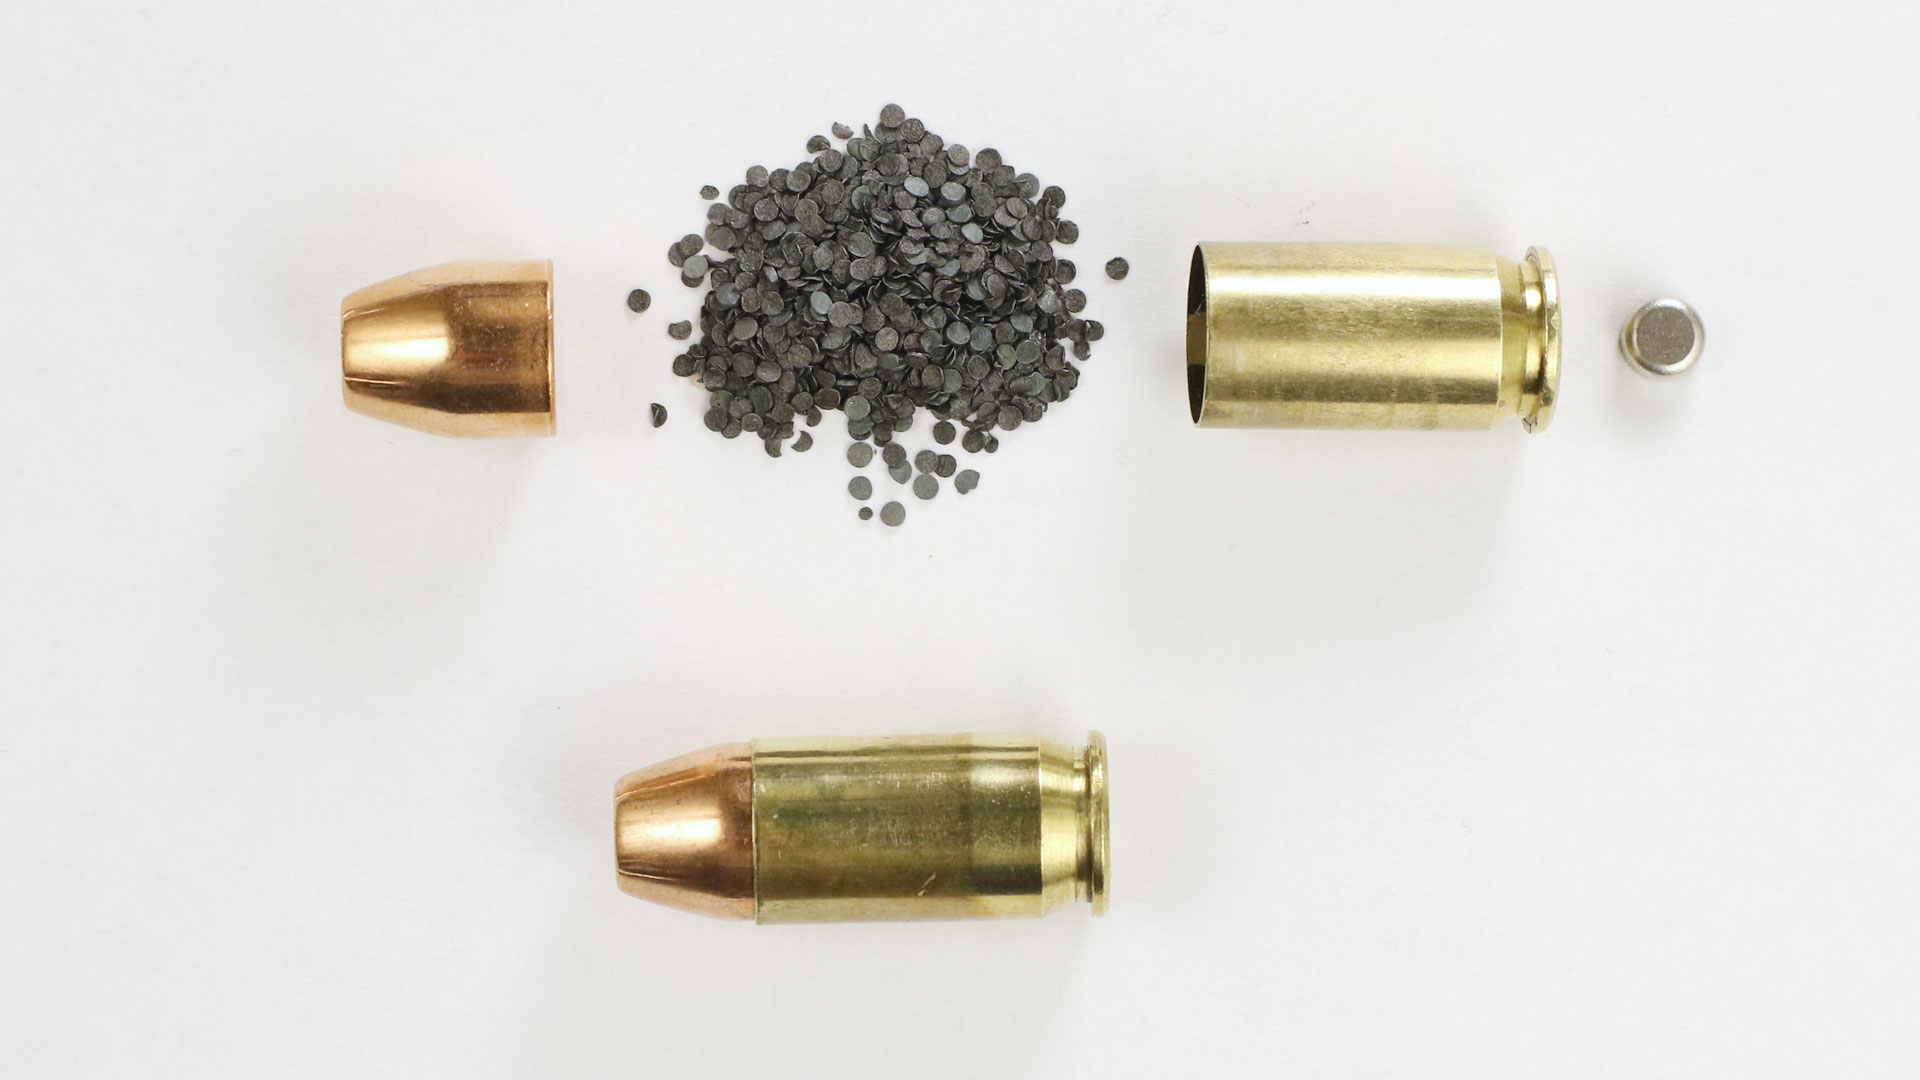 What Are The Basic Parts of Ammunition? - The Components of Ammo